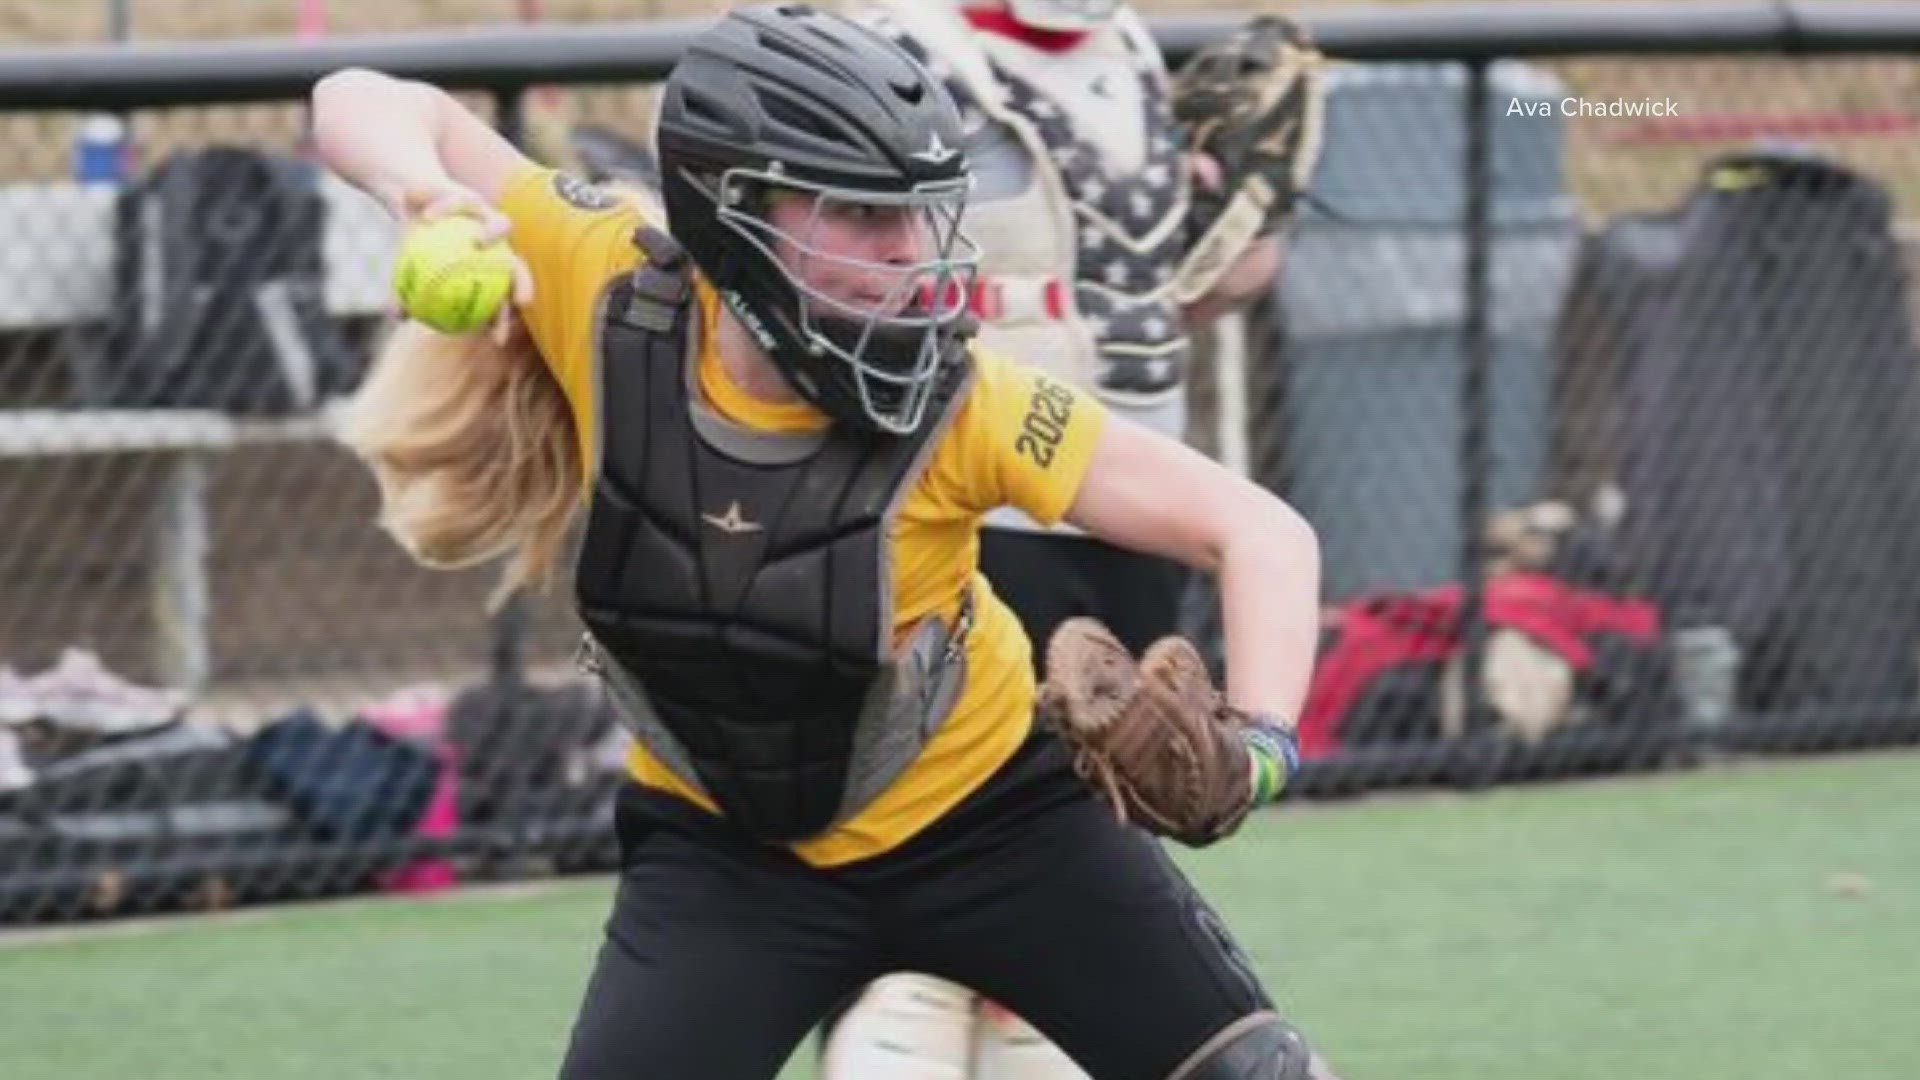 Ava Chadwick, a sophomore catcher for St. Mary's Ryken High School in Leonardtown, was named as one of the top softball players across the nation in her age group.